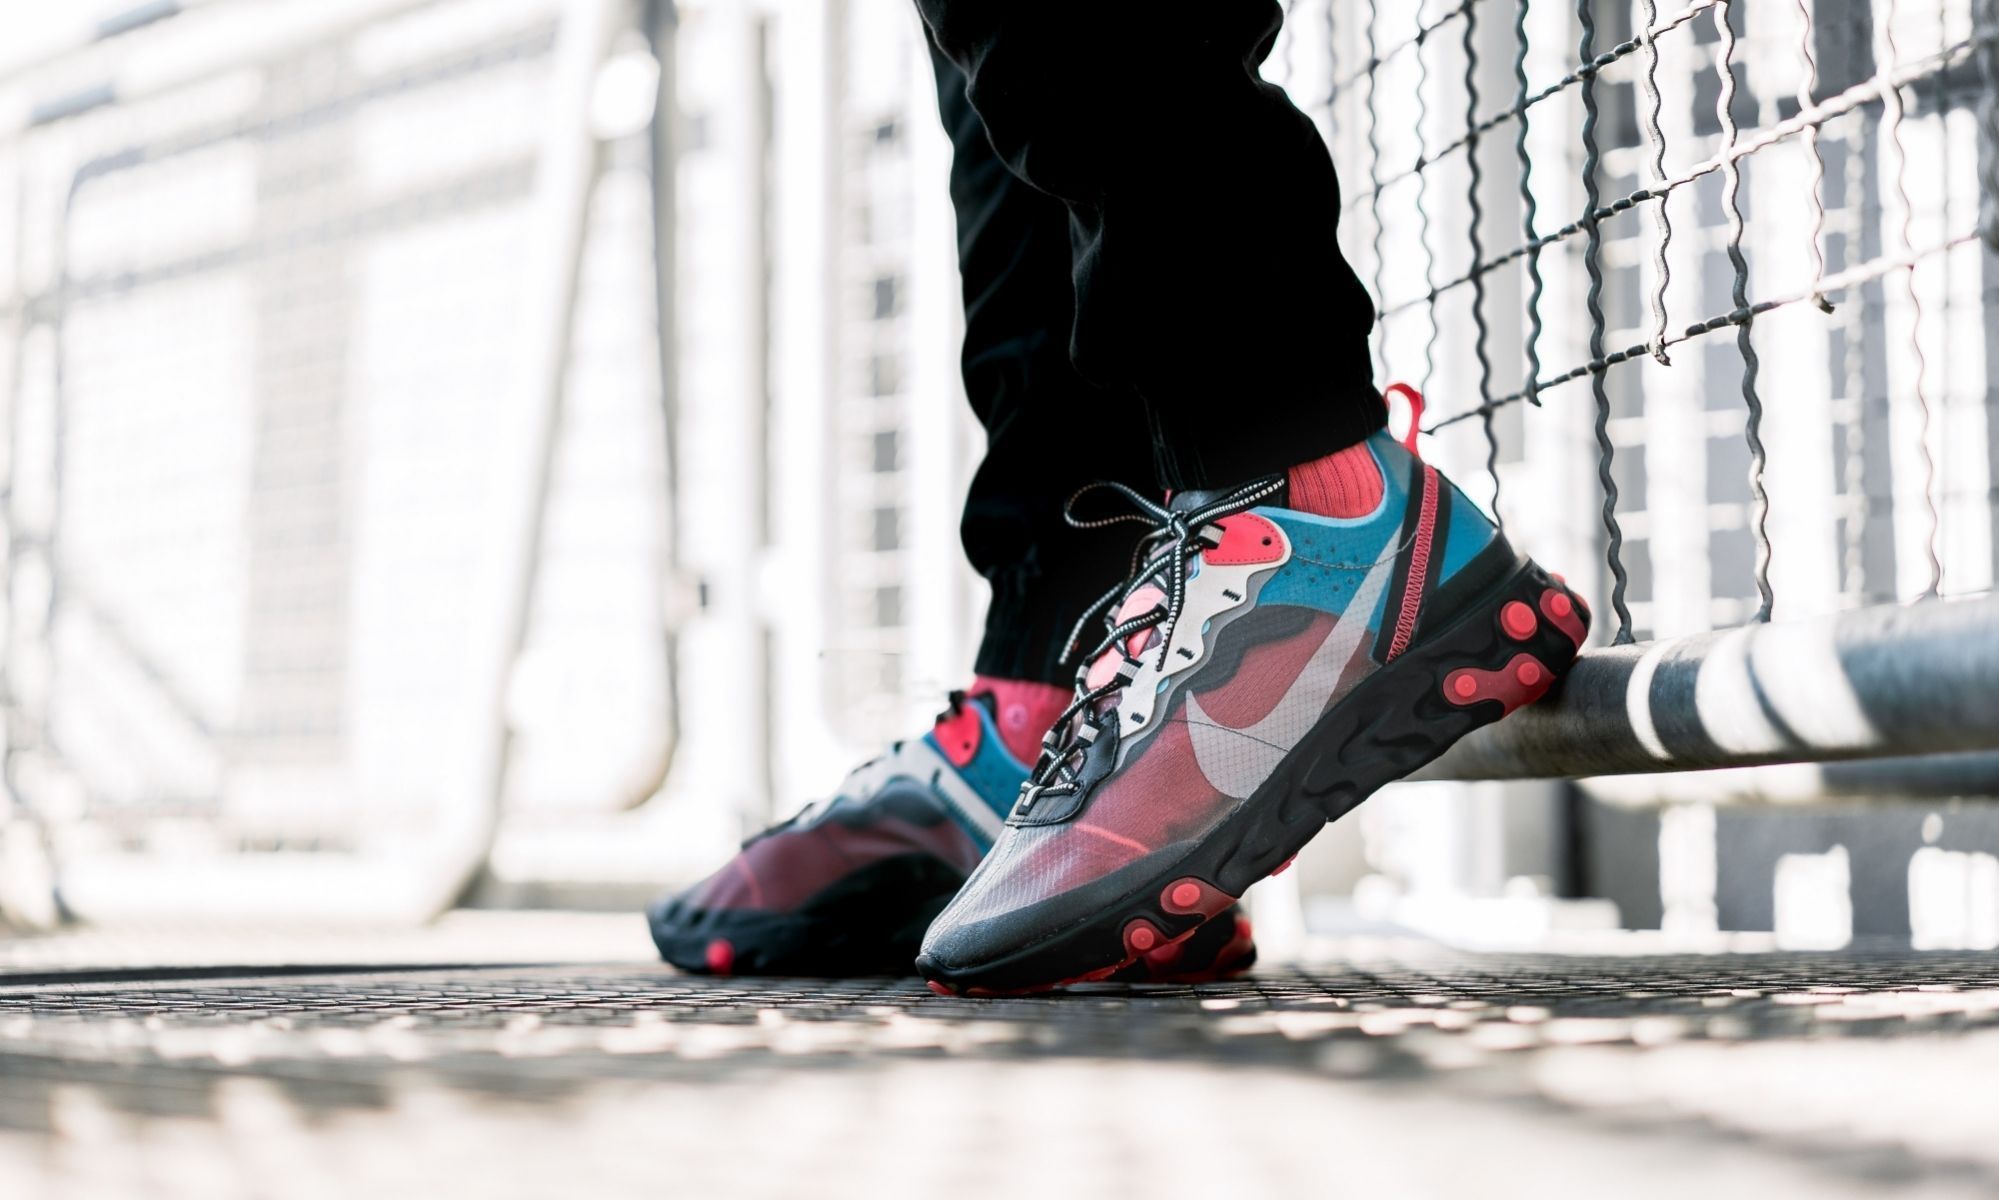 KicksFinder on Twitter: "Ad: The Nike React Element 87 "Black/Blue Chill/Solar  Red" is just $120.97 + Free shipping (Retail: $160) at Nikestore! &gt;&gt;  https://t.co/MgM5oRUNiX https://t.co/94e5a2PoM5" / Twitter